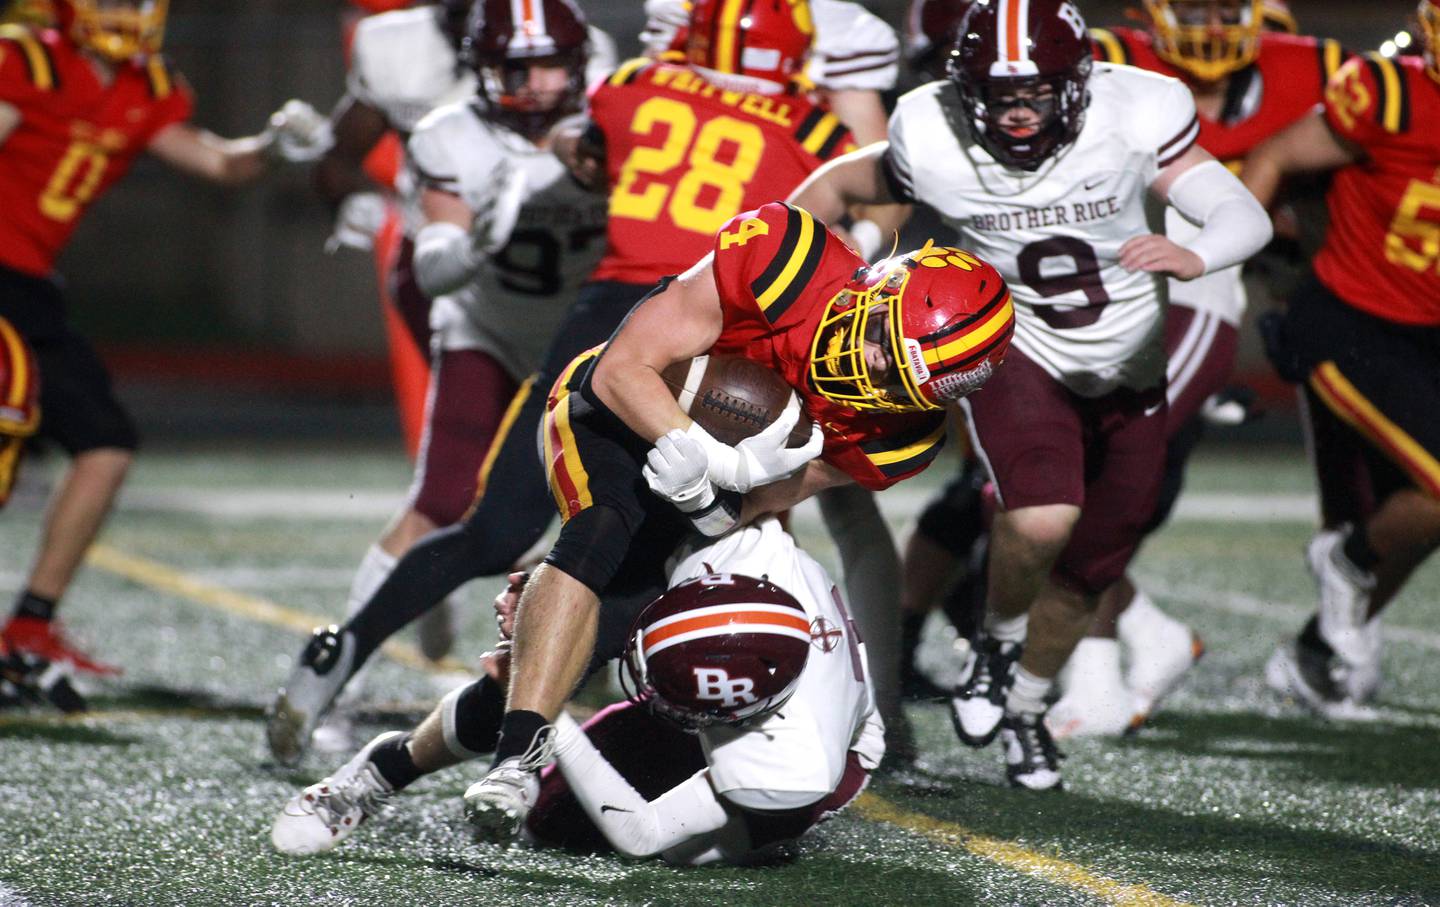 Batavia’s Charlie Whelpley is taken down with the ball during a Class 7A round 1 playoff game against Brother Rice in Batavia on Friday, Oct. 27, 2023.